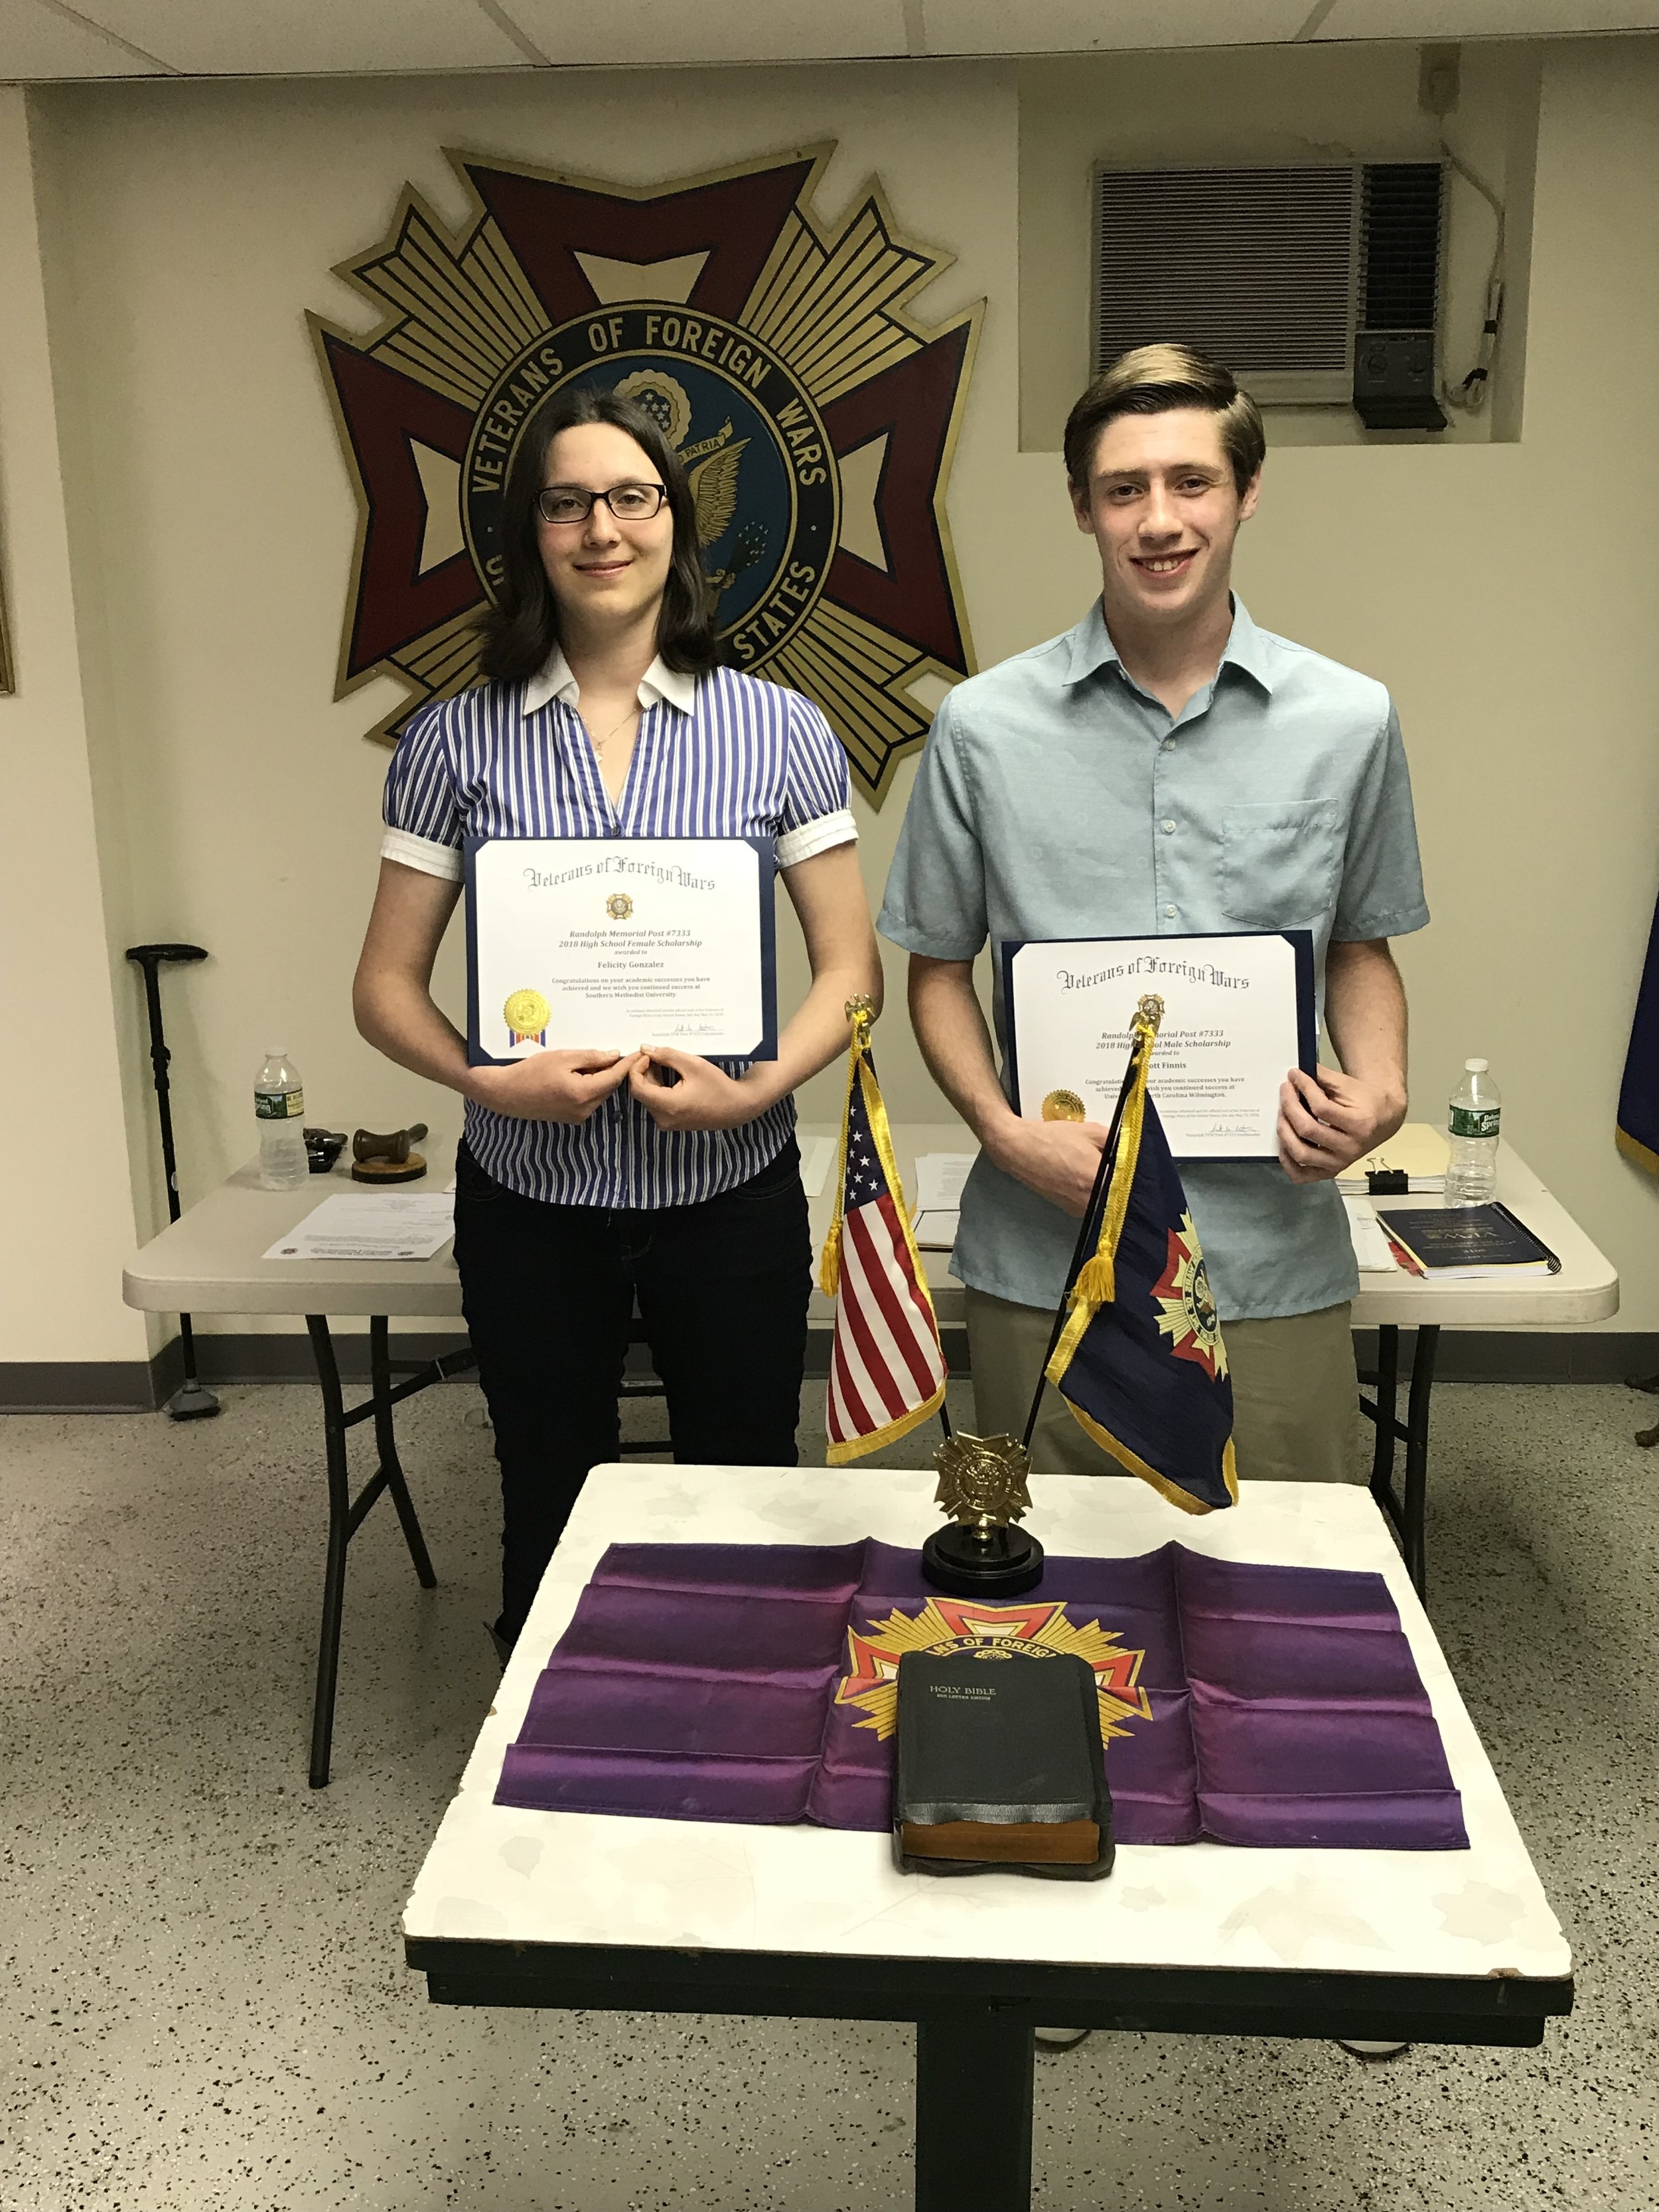  Randolph Memorial Post #7333 Veterans of Foreign Wars presented their 2018 scholarship awards to Felicity Gonzalez and Scott Finnis. 